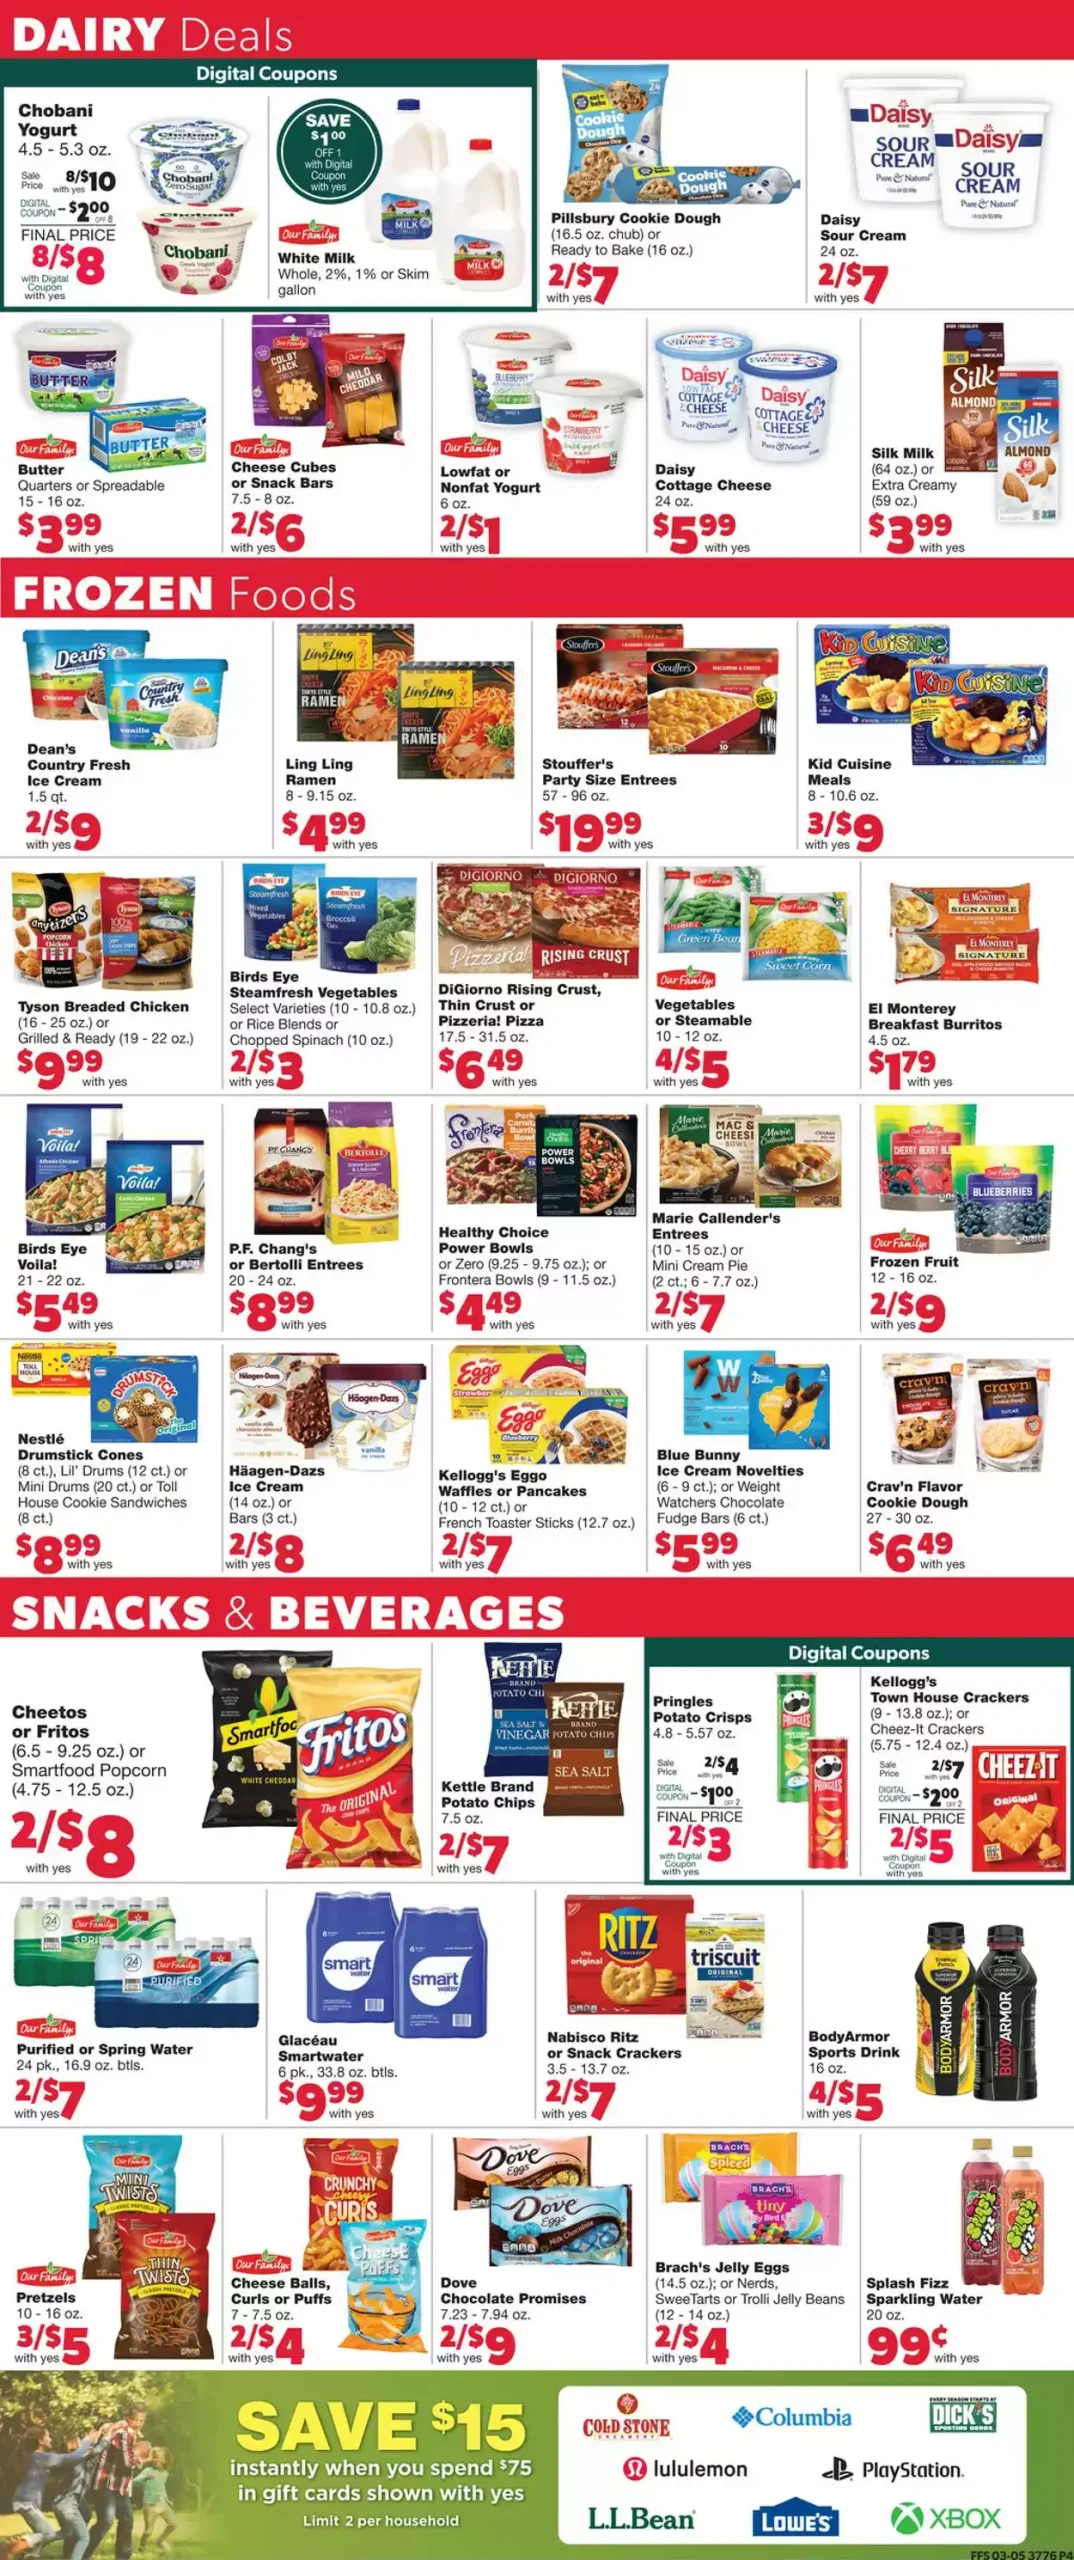 Family Fare Weekly Ad Preview for March 22 - 28, 2023 4